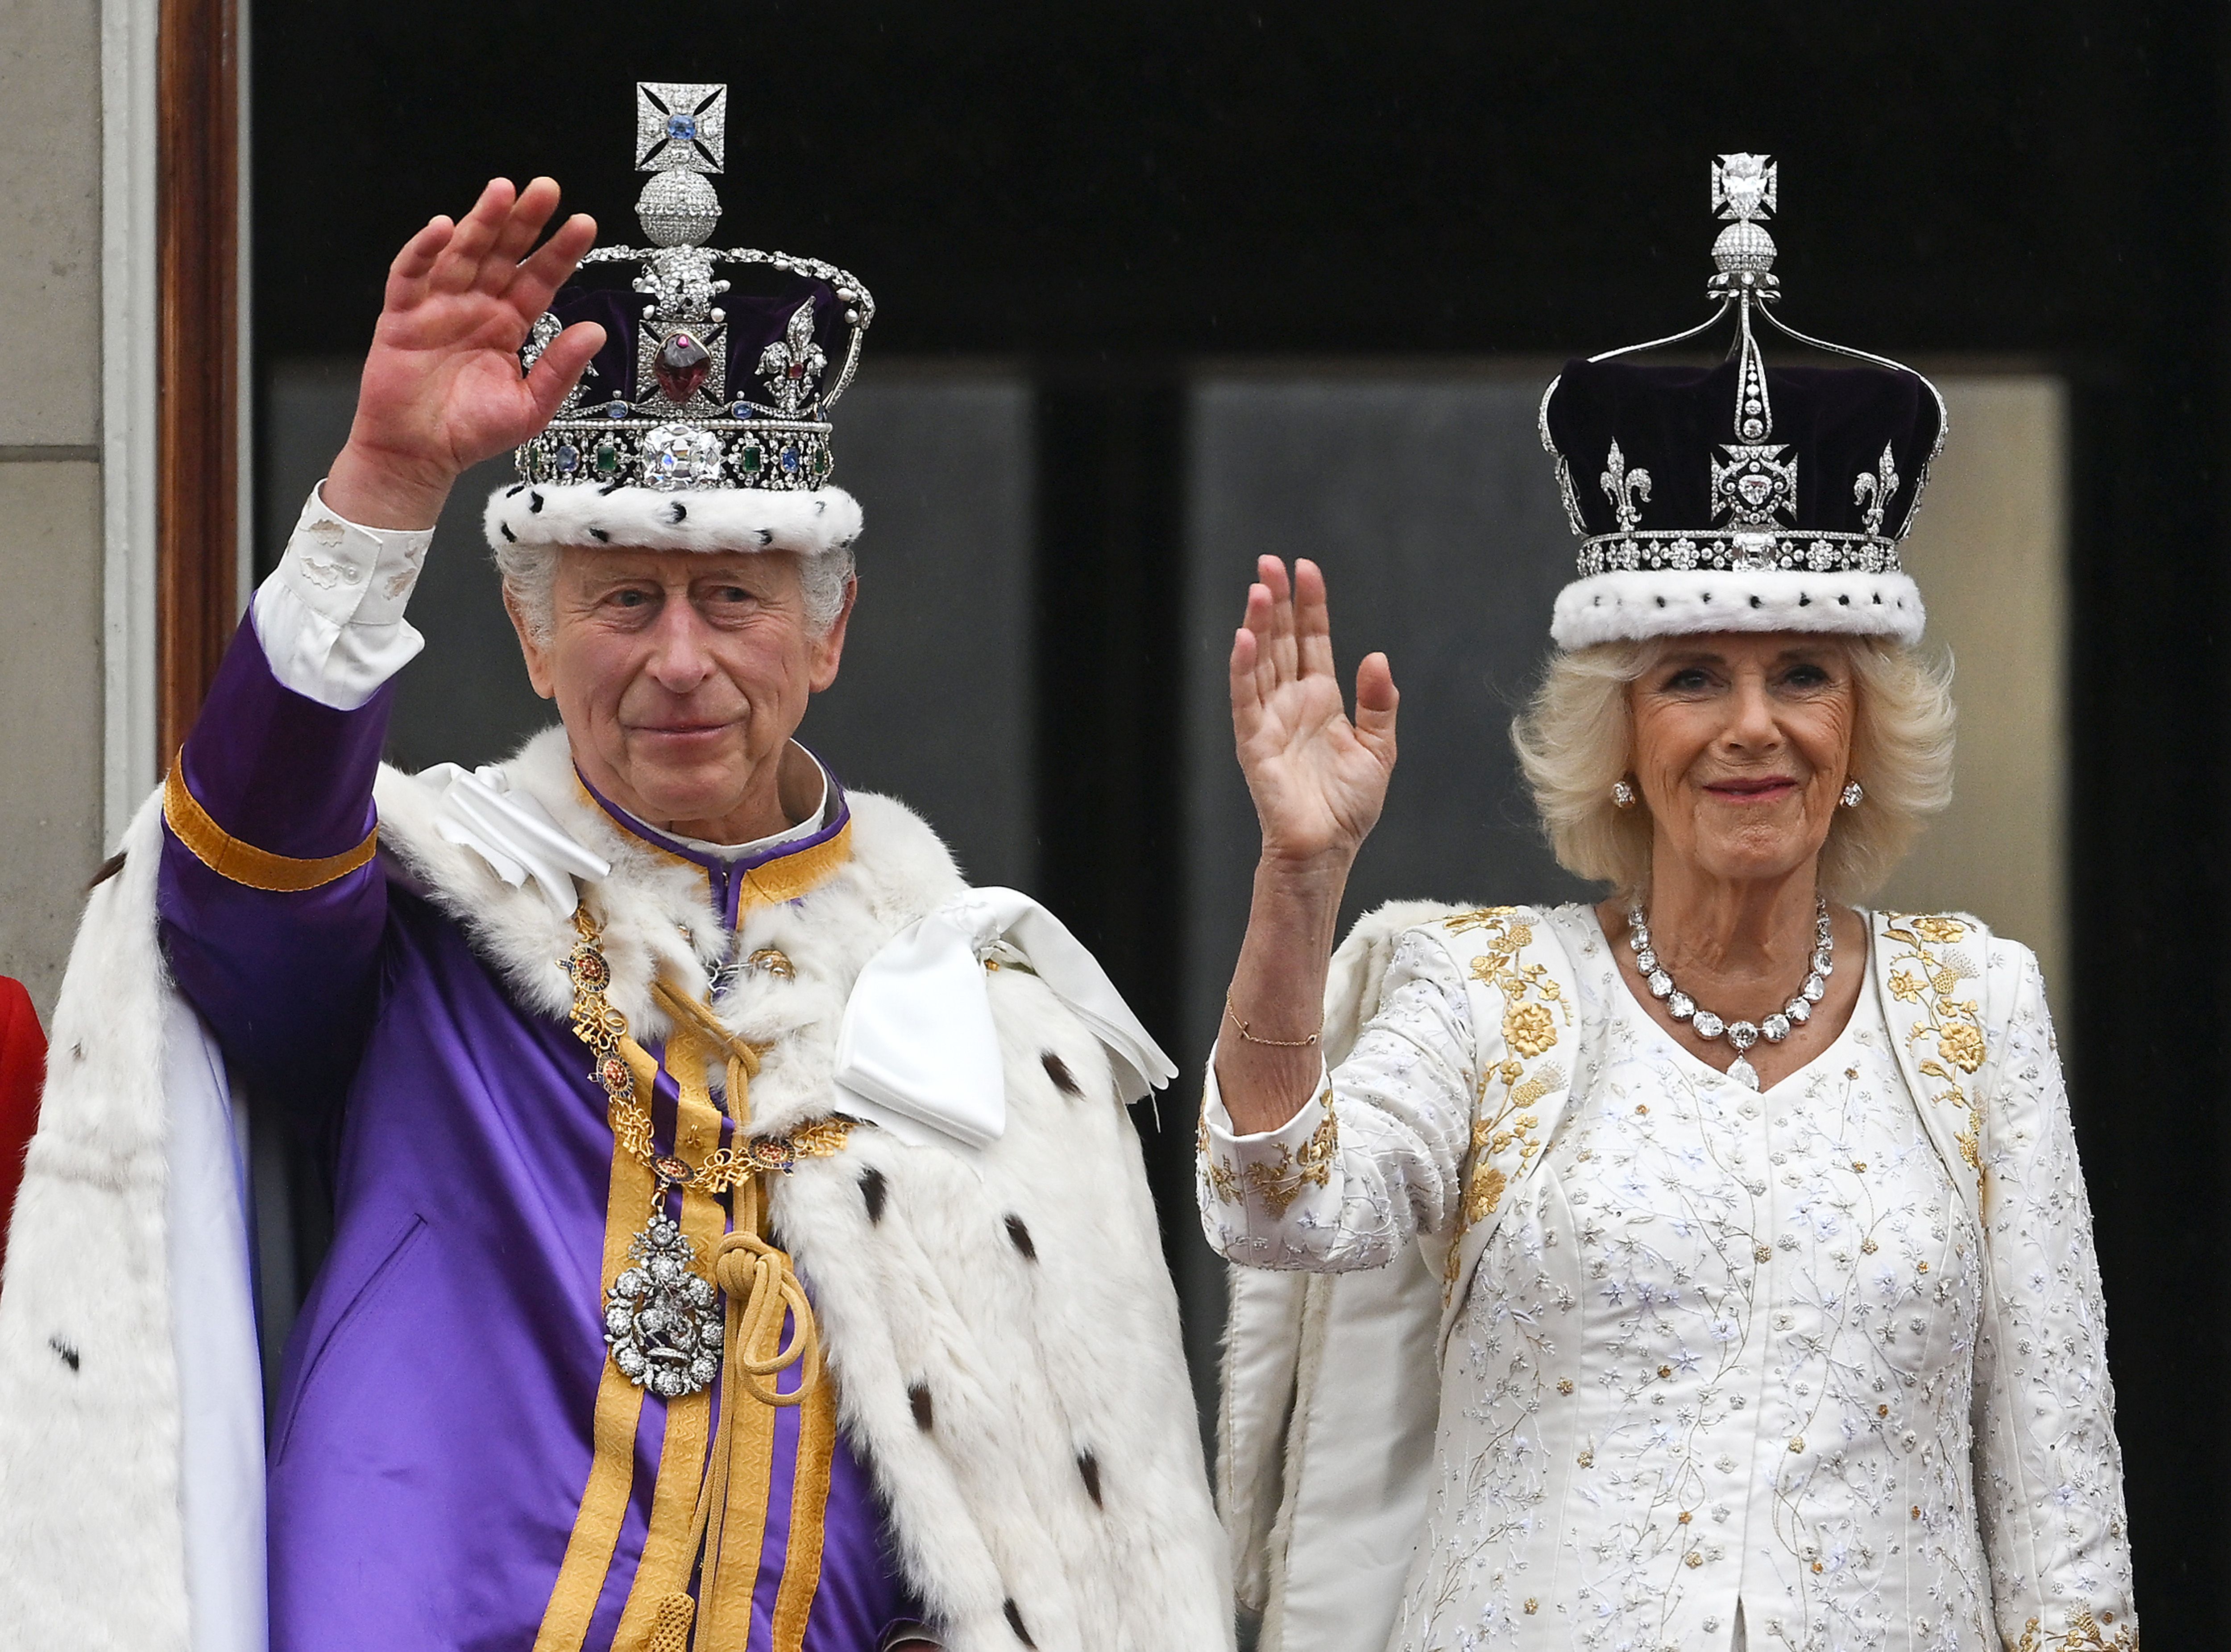 Introducing the King and Queen: Photos and details from the Coronation